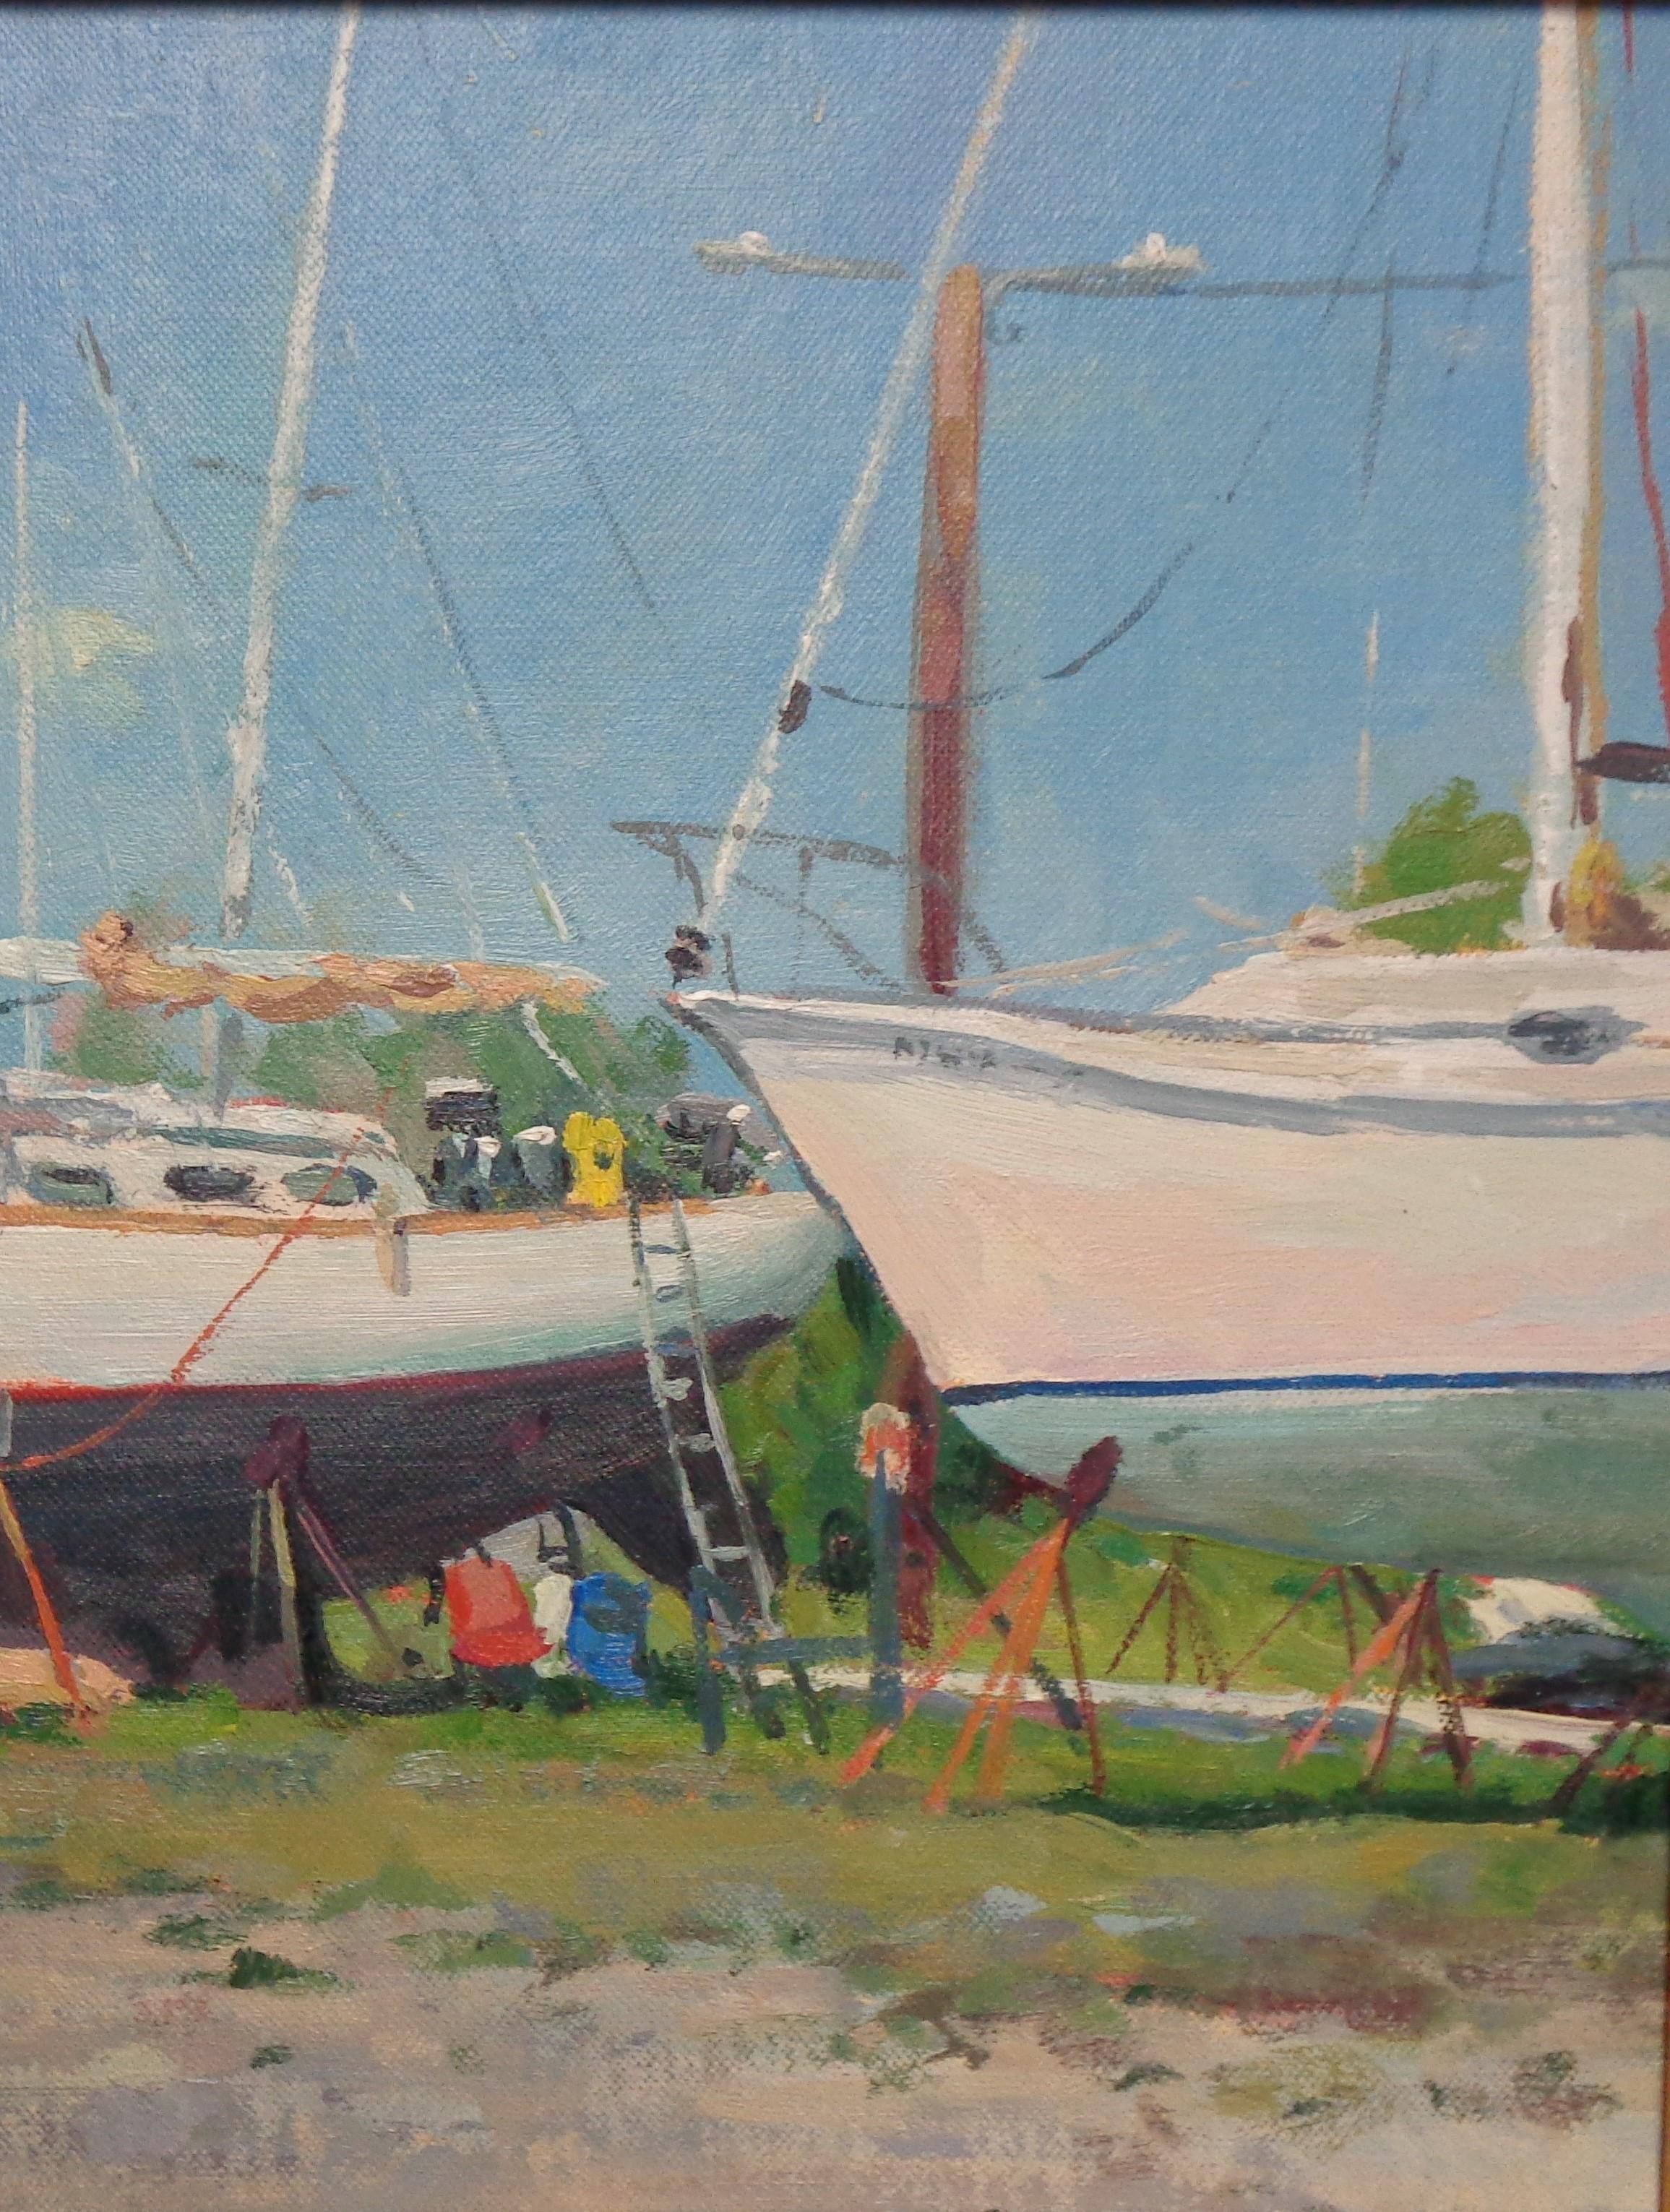 Hancock Harbor Greenwich NJ
oil/panel 12 x 16 image
Hancock Harbor is an plein air oil painting on canvas panel by award winning contemporary artist Michael Budden that showcases a uniquely beautiful scene with boats on stilts with an incredible